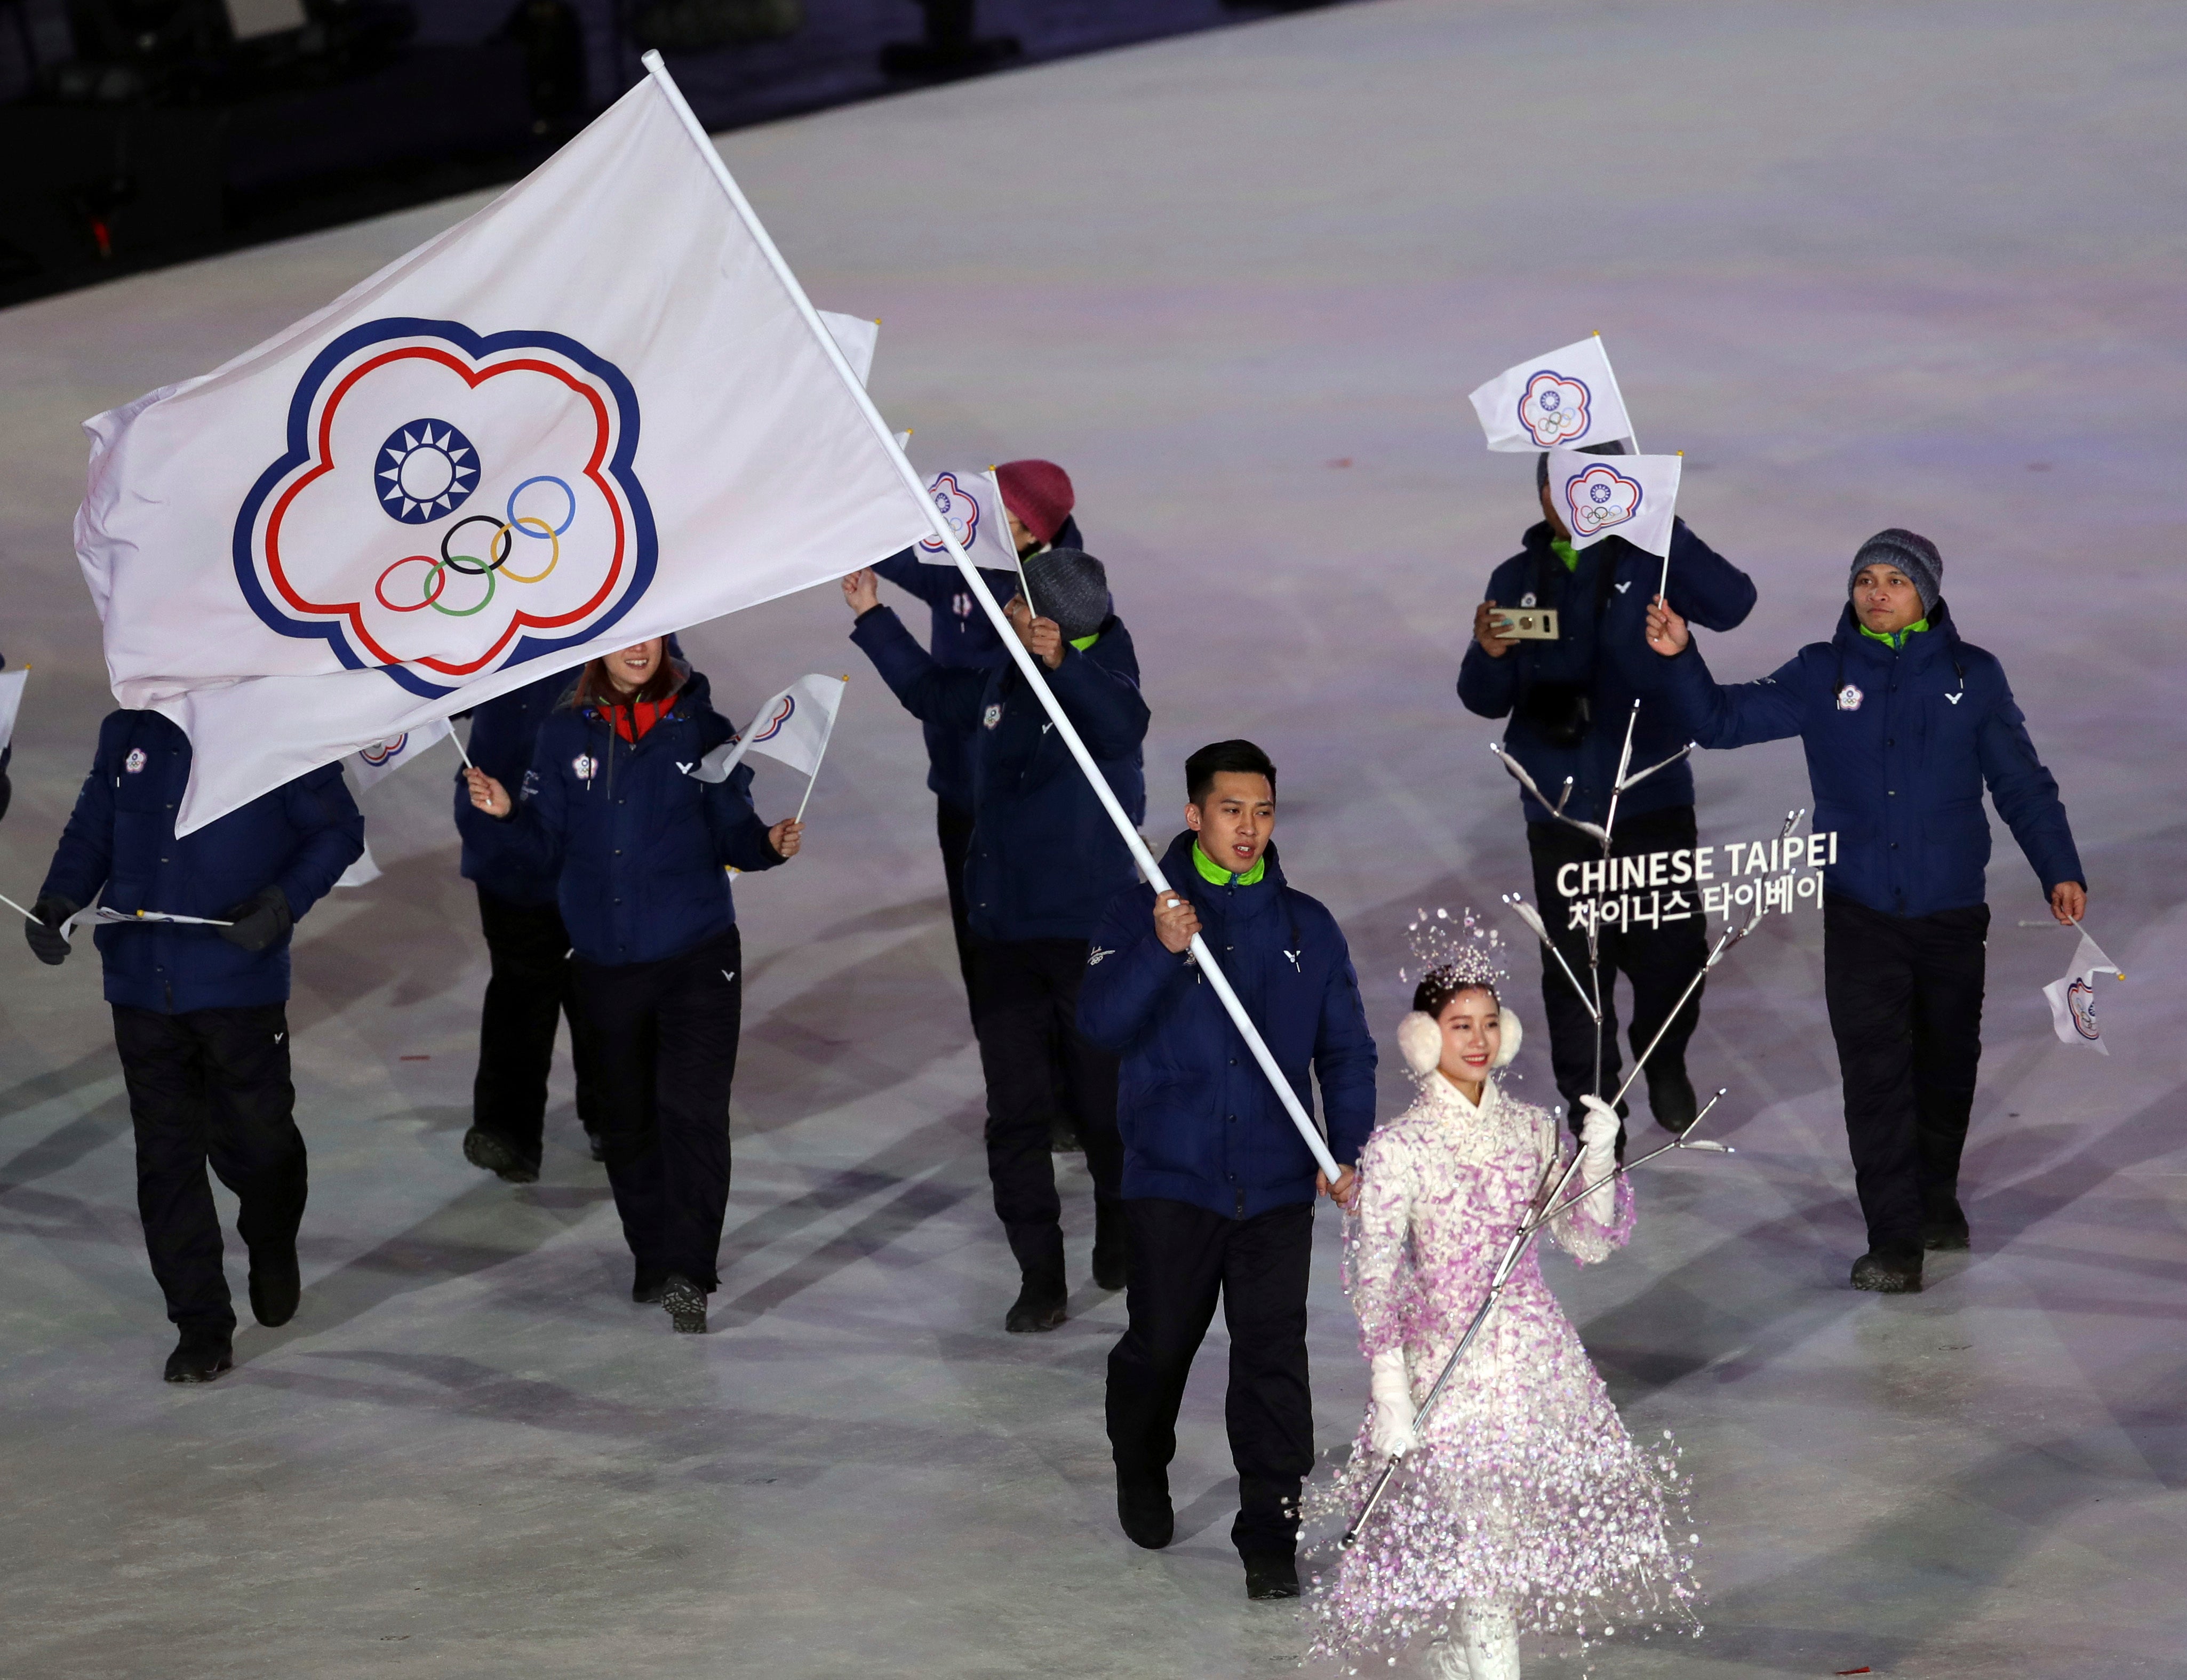 Winter Olympics 2018 Opening Ceremony: Highlights and Analysis